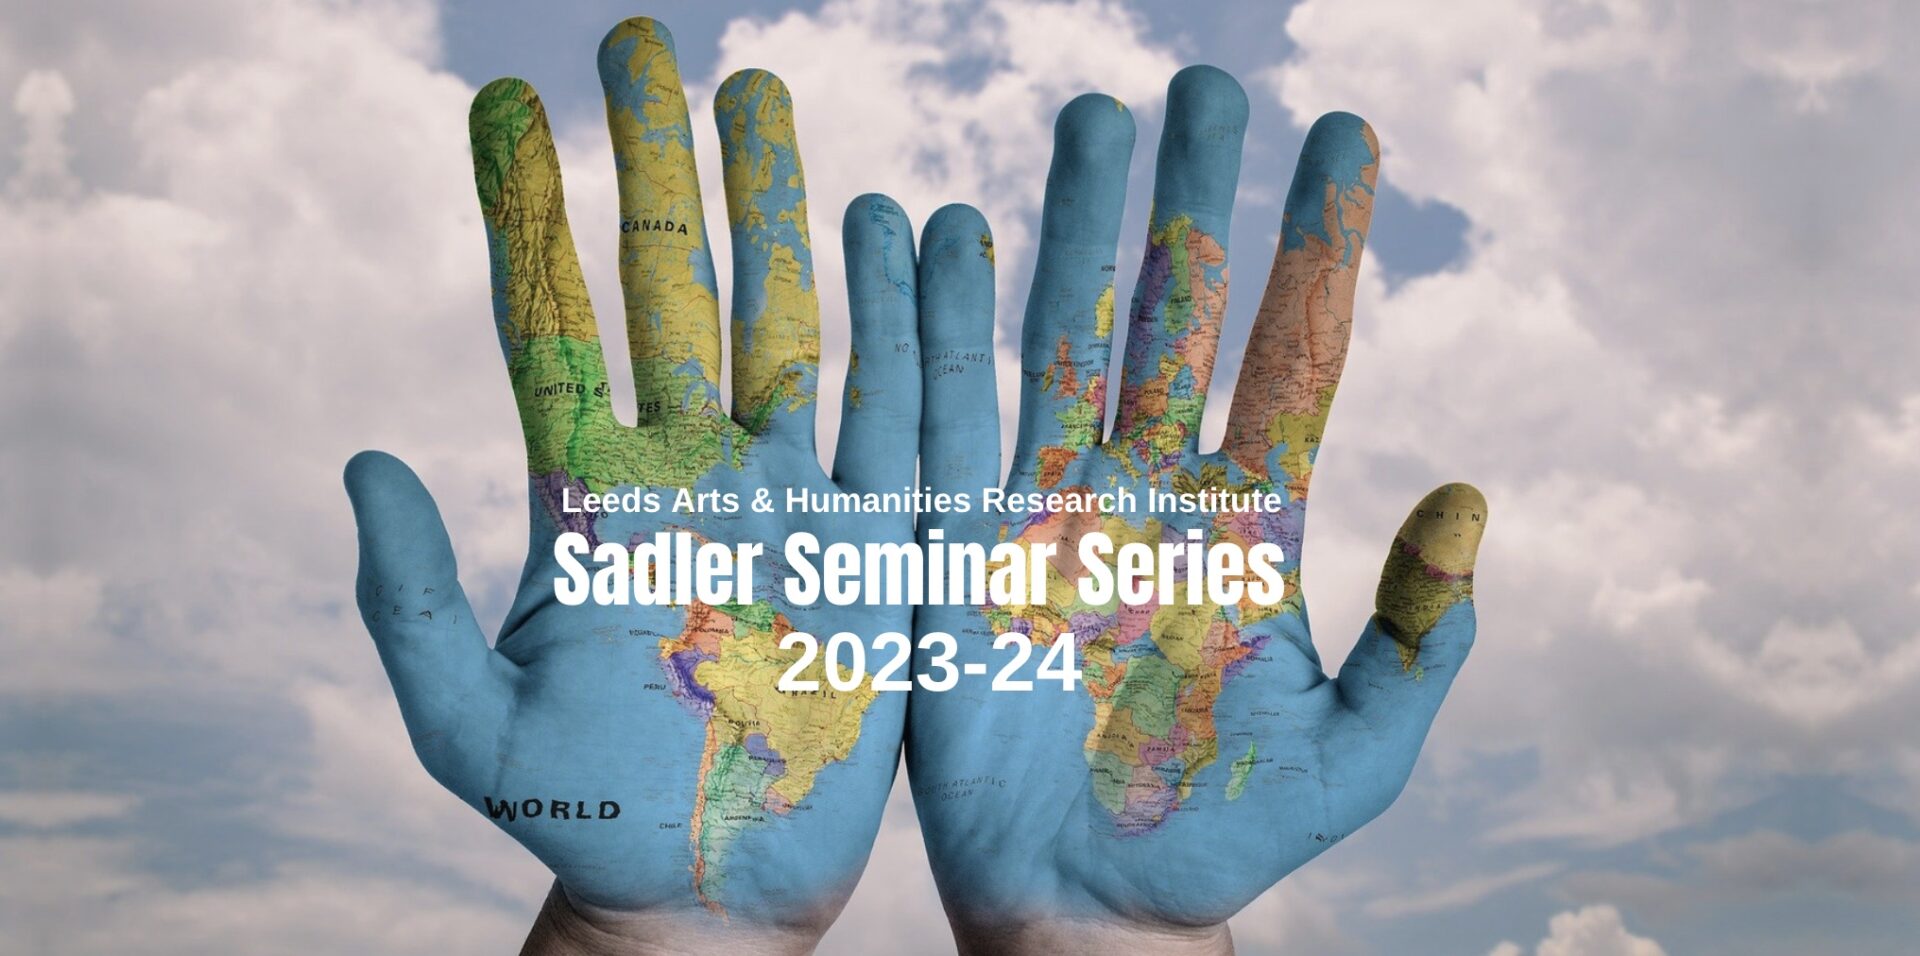 A pair of hands, covered in a map of the world, appearing to hold the text "Leeds Arts & Humanities Research Institute. Sadler Seminar Series. 2023 to 2024".